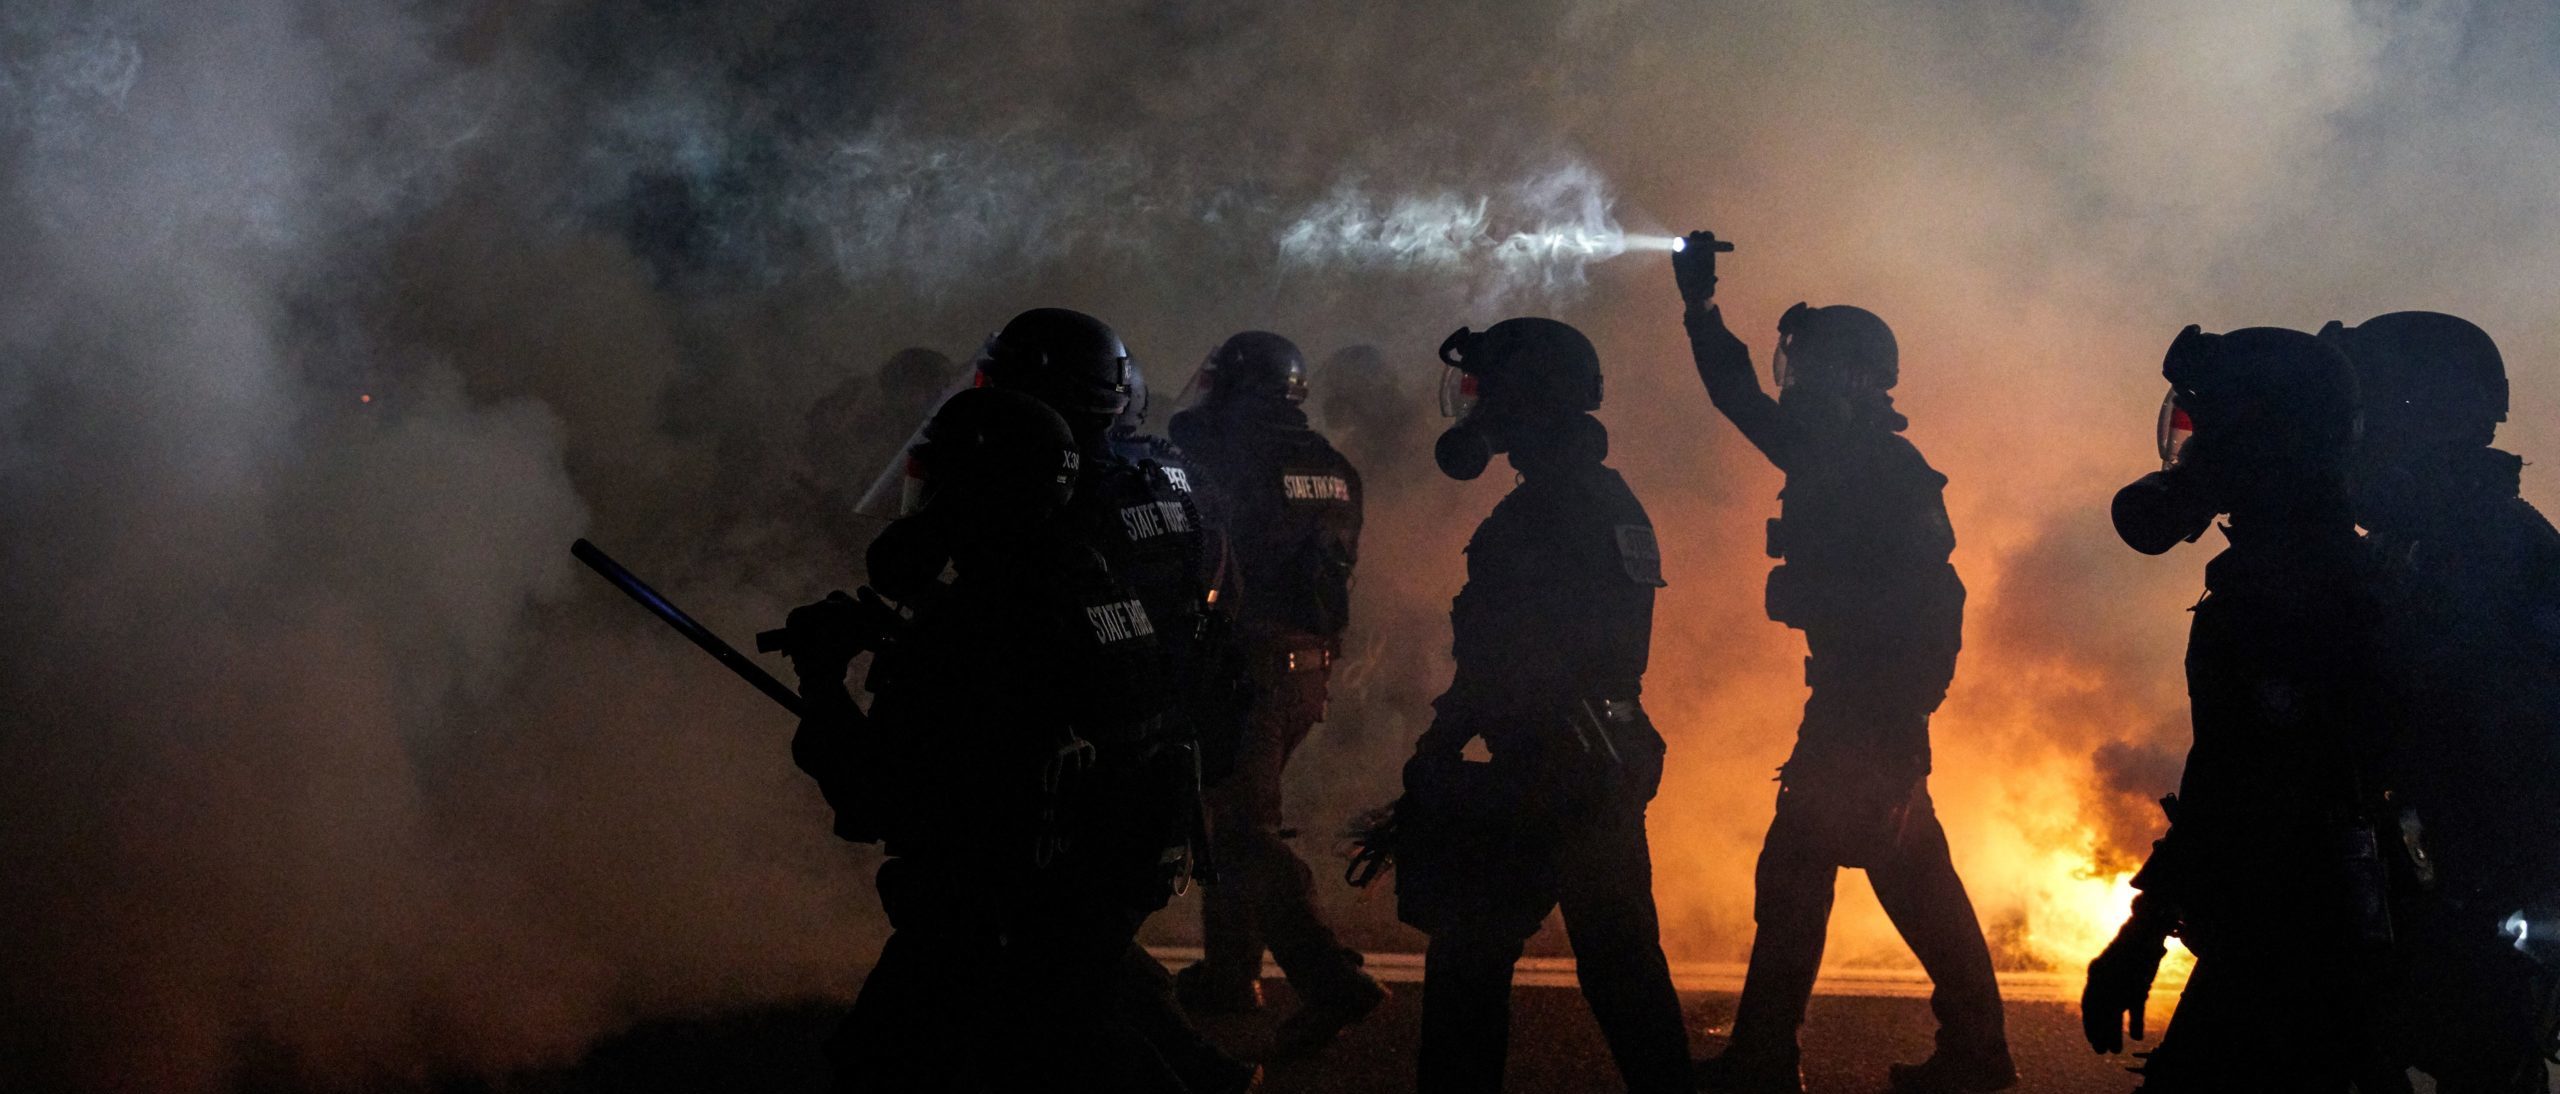 Oregon Police wearing anti-riot gear march towards protesters through tear gas smoke during the 100th day and night of protests against racism and police brutality in Portland, Oregon, on September 5, 2020. (Photo by ALLISON DINNER/AFP via Getty Images)